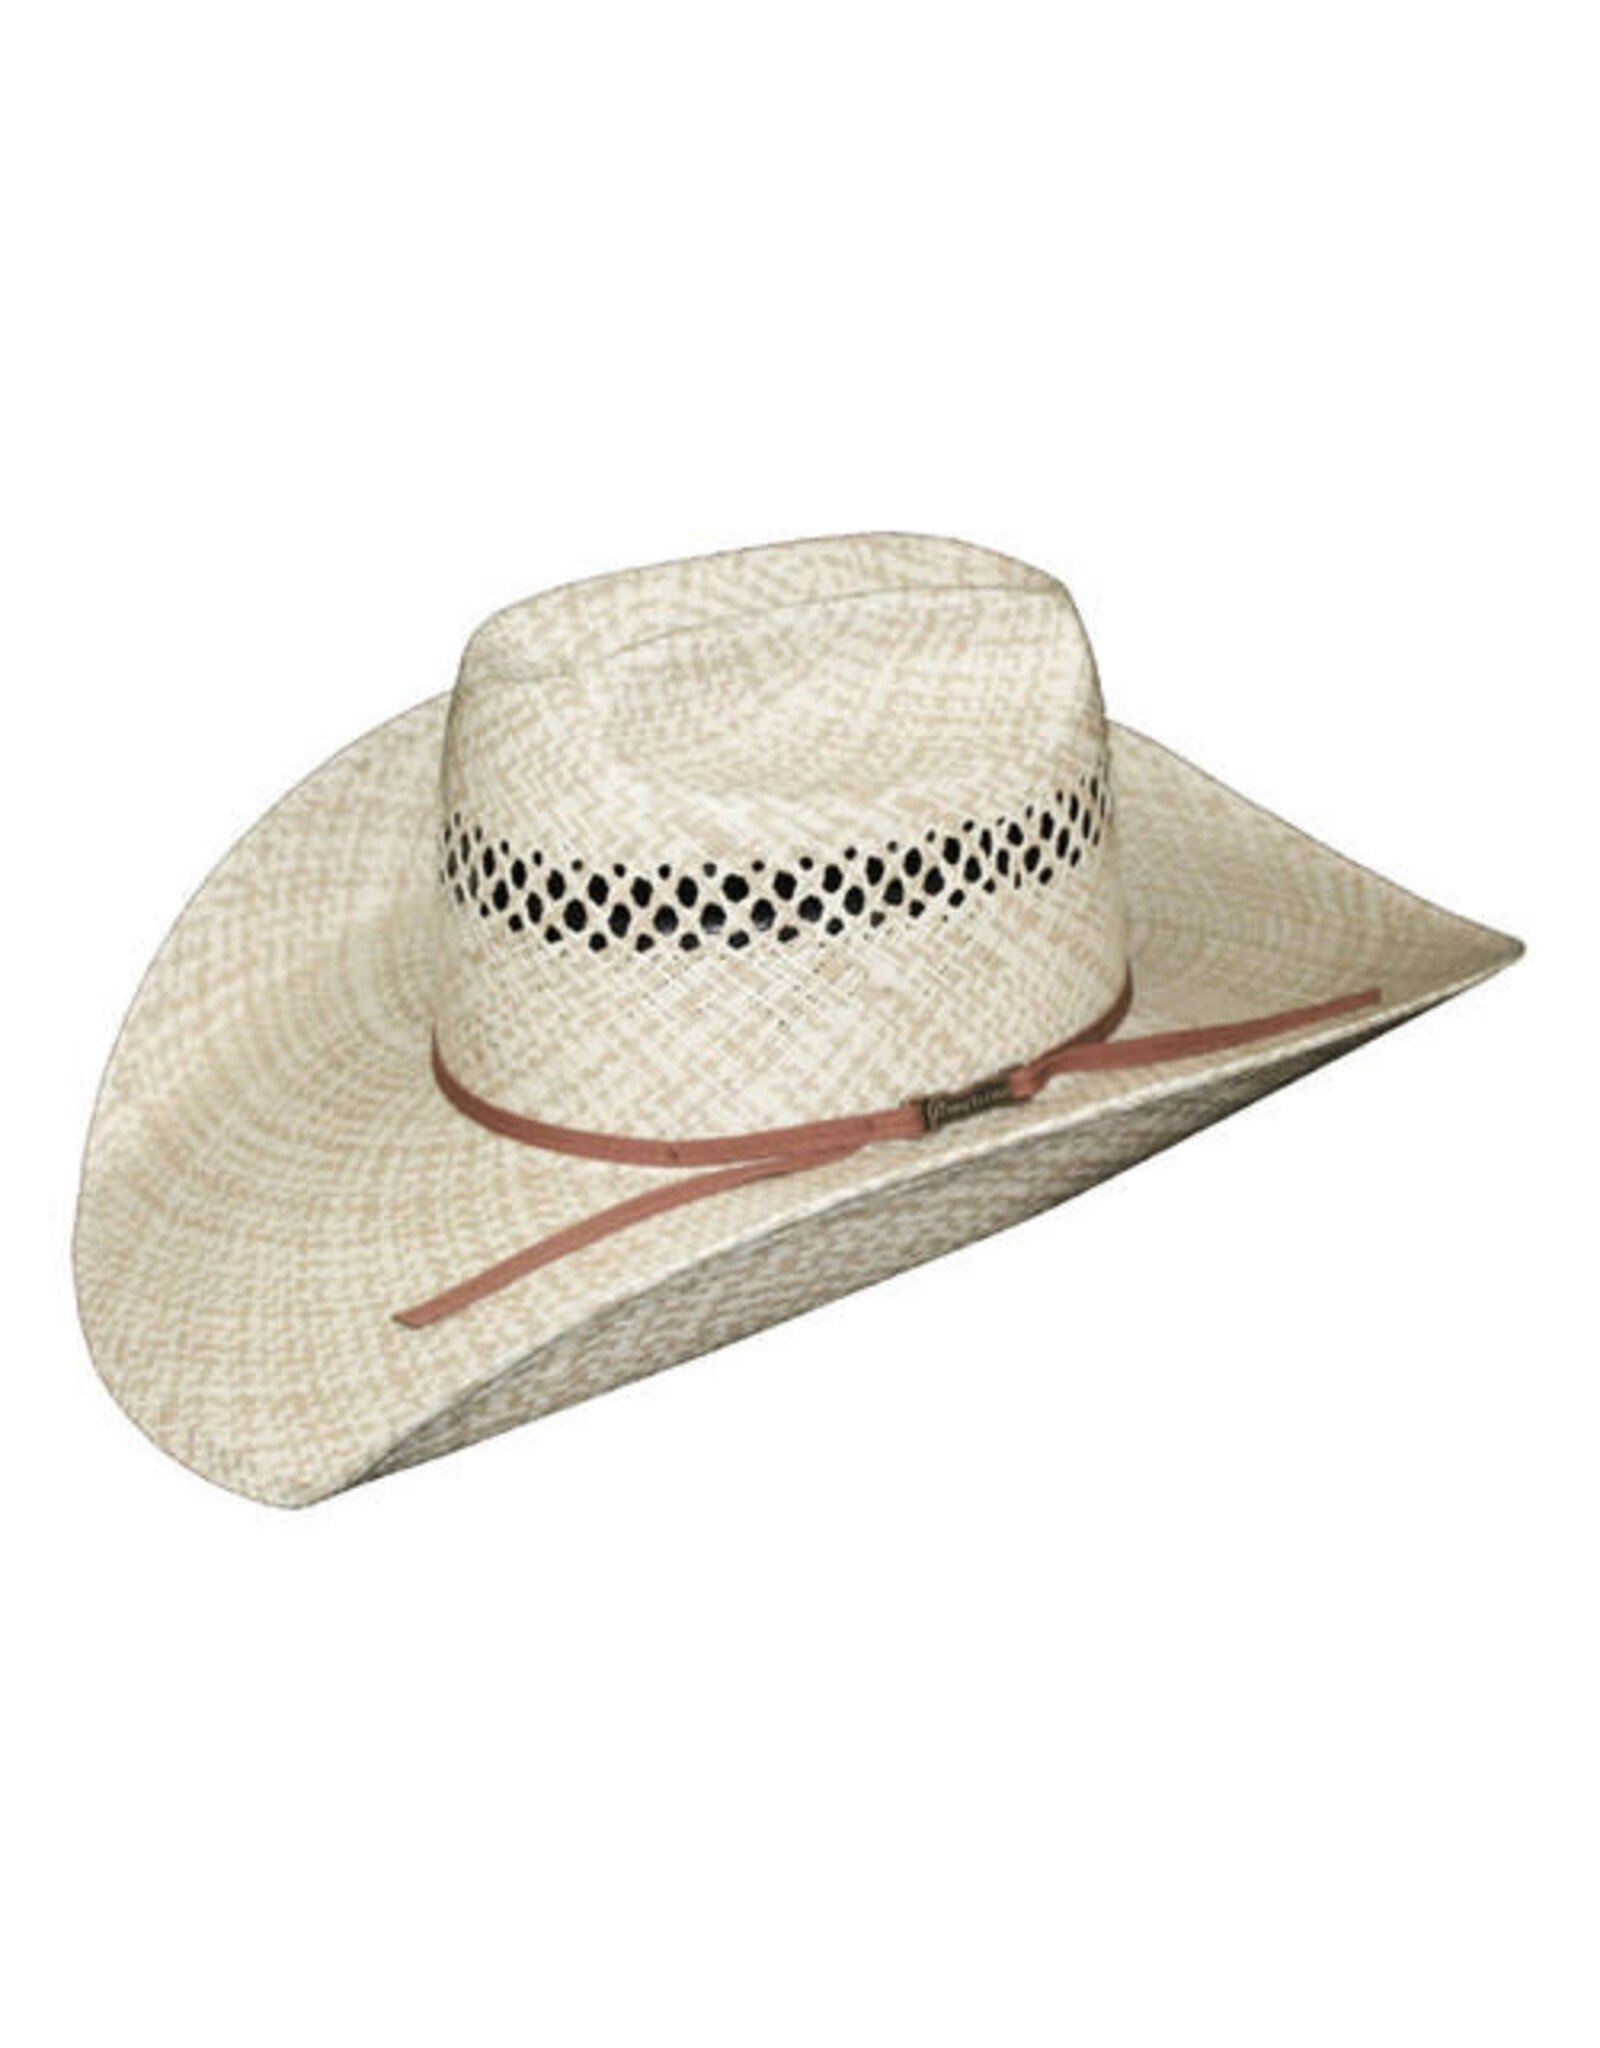 American Hat Co. 6500 RC 2CWHIS LO Straw Cowboy Hat